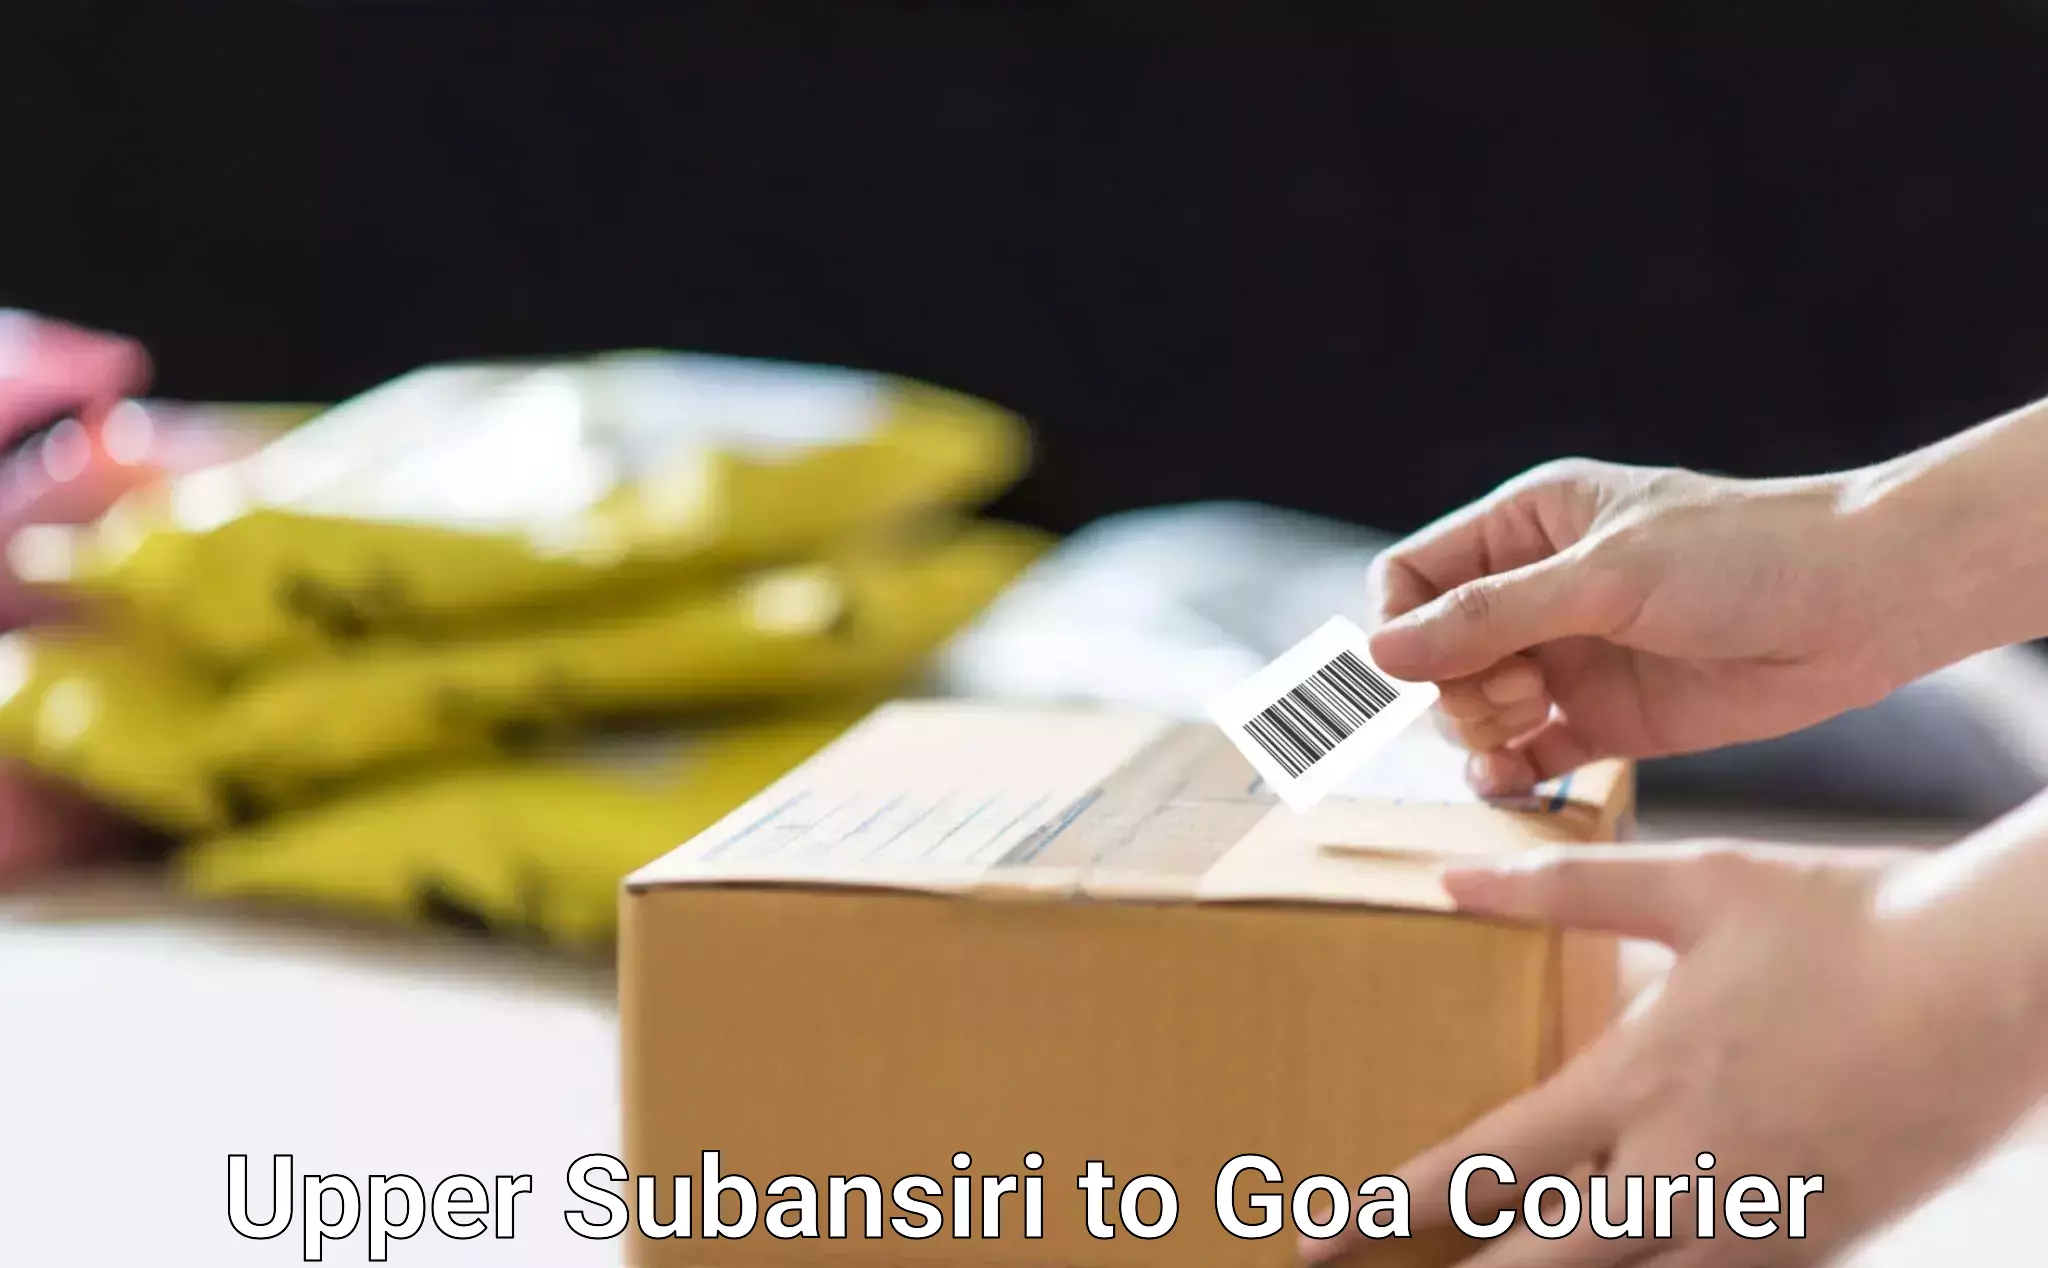 Reliable delivery network Upper Subansiri to Goa